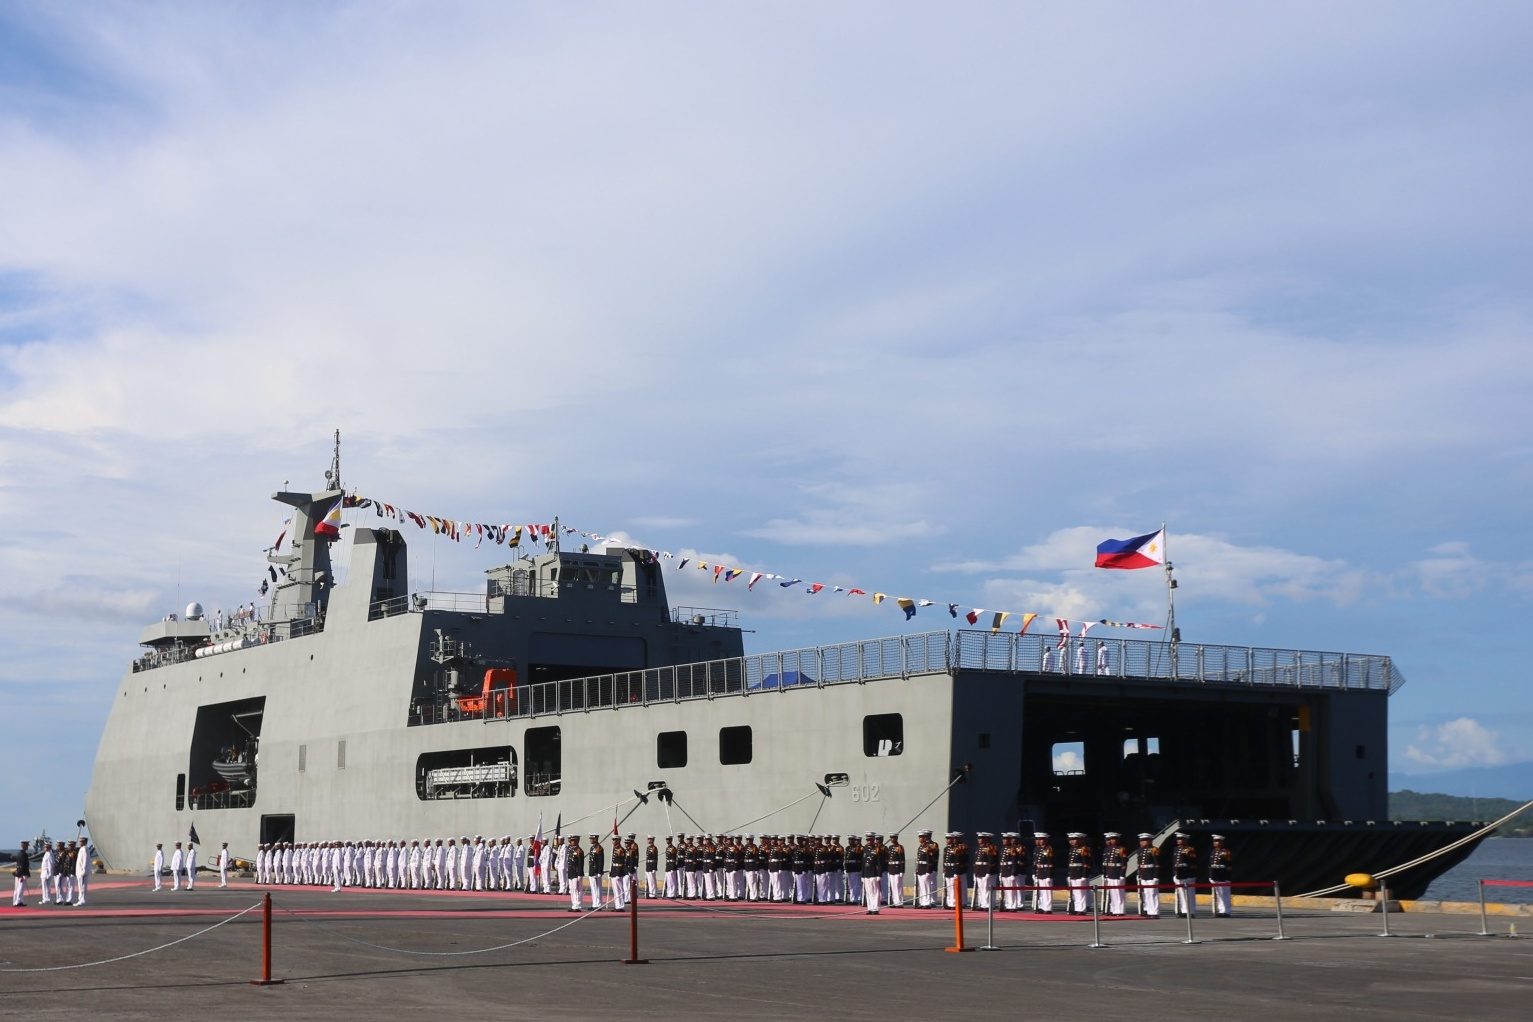 BRP DAVAO DEL SUR. One of the biggest ships of the Philippine Navy, the BRP Davao del Sur is commissioned on May 31, 2017. Photo by Manman Dejeto/Rappler  